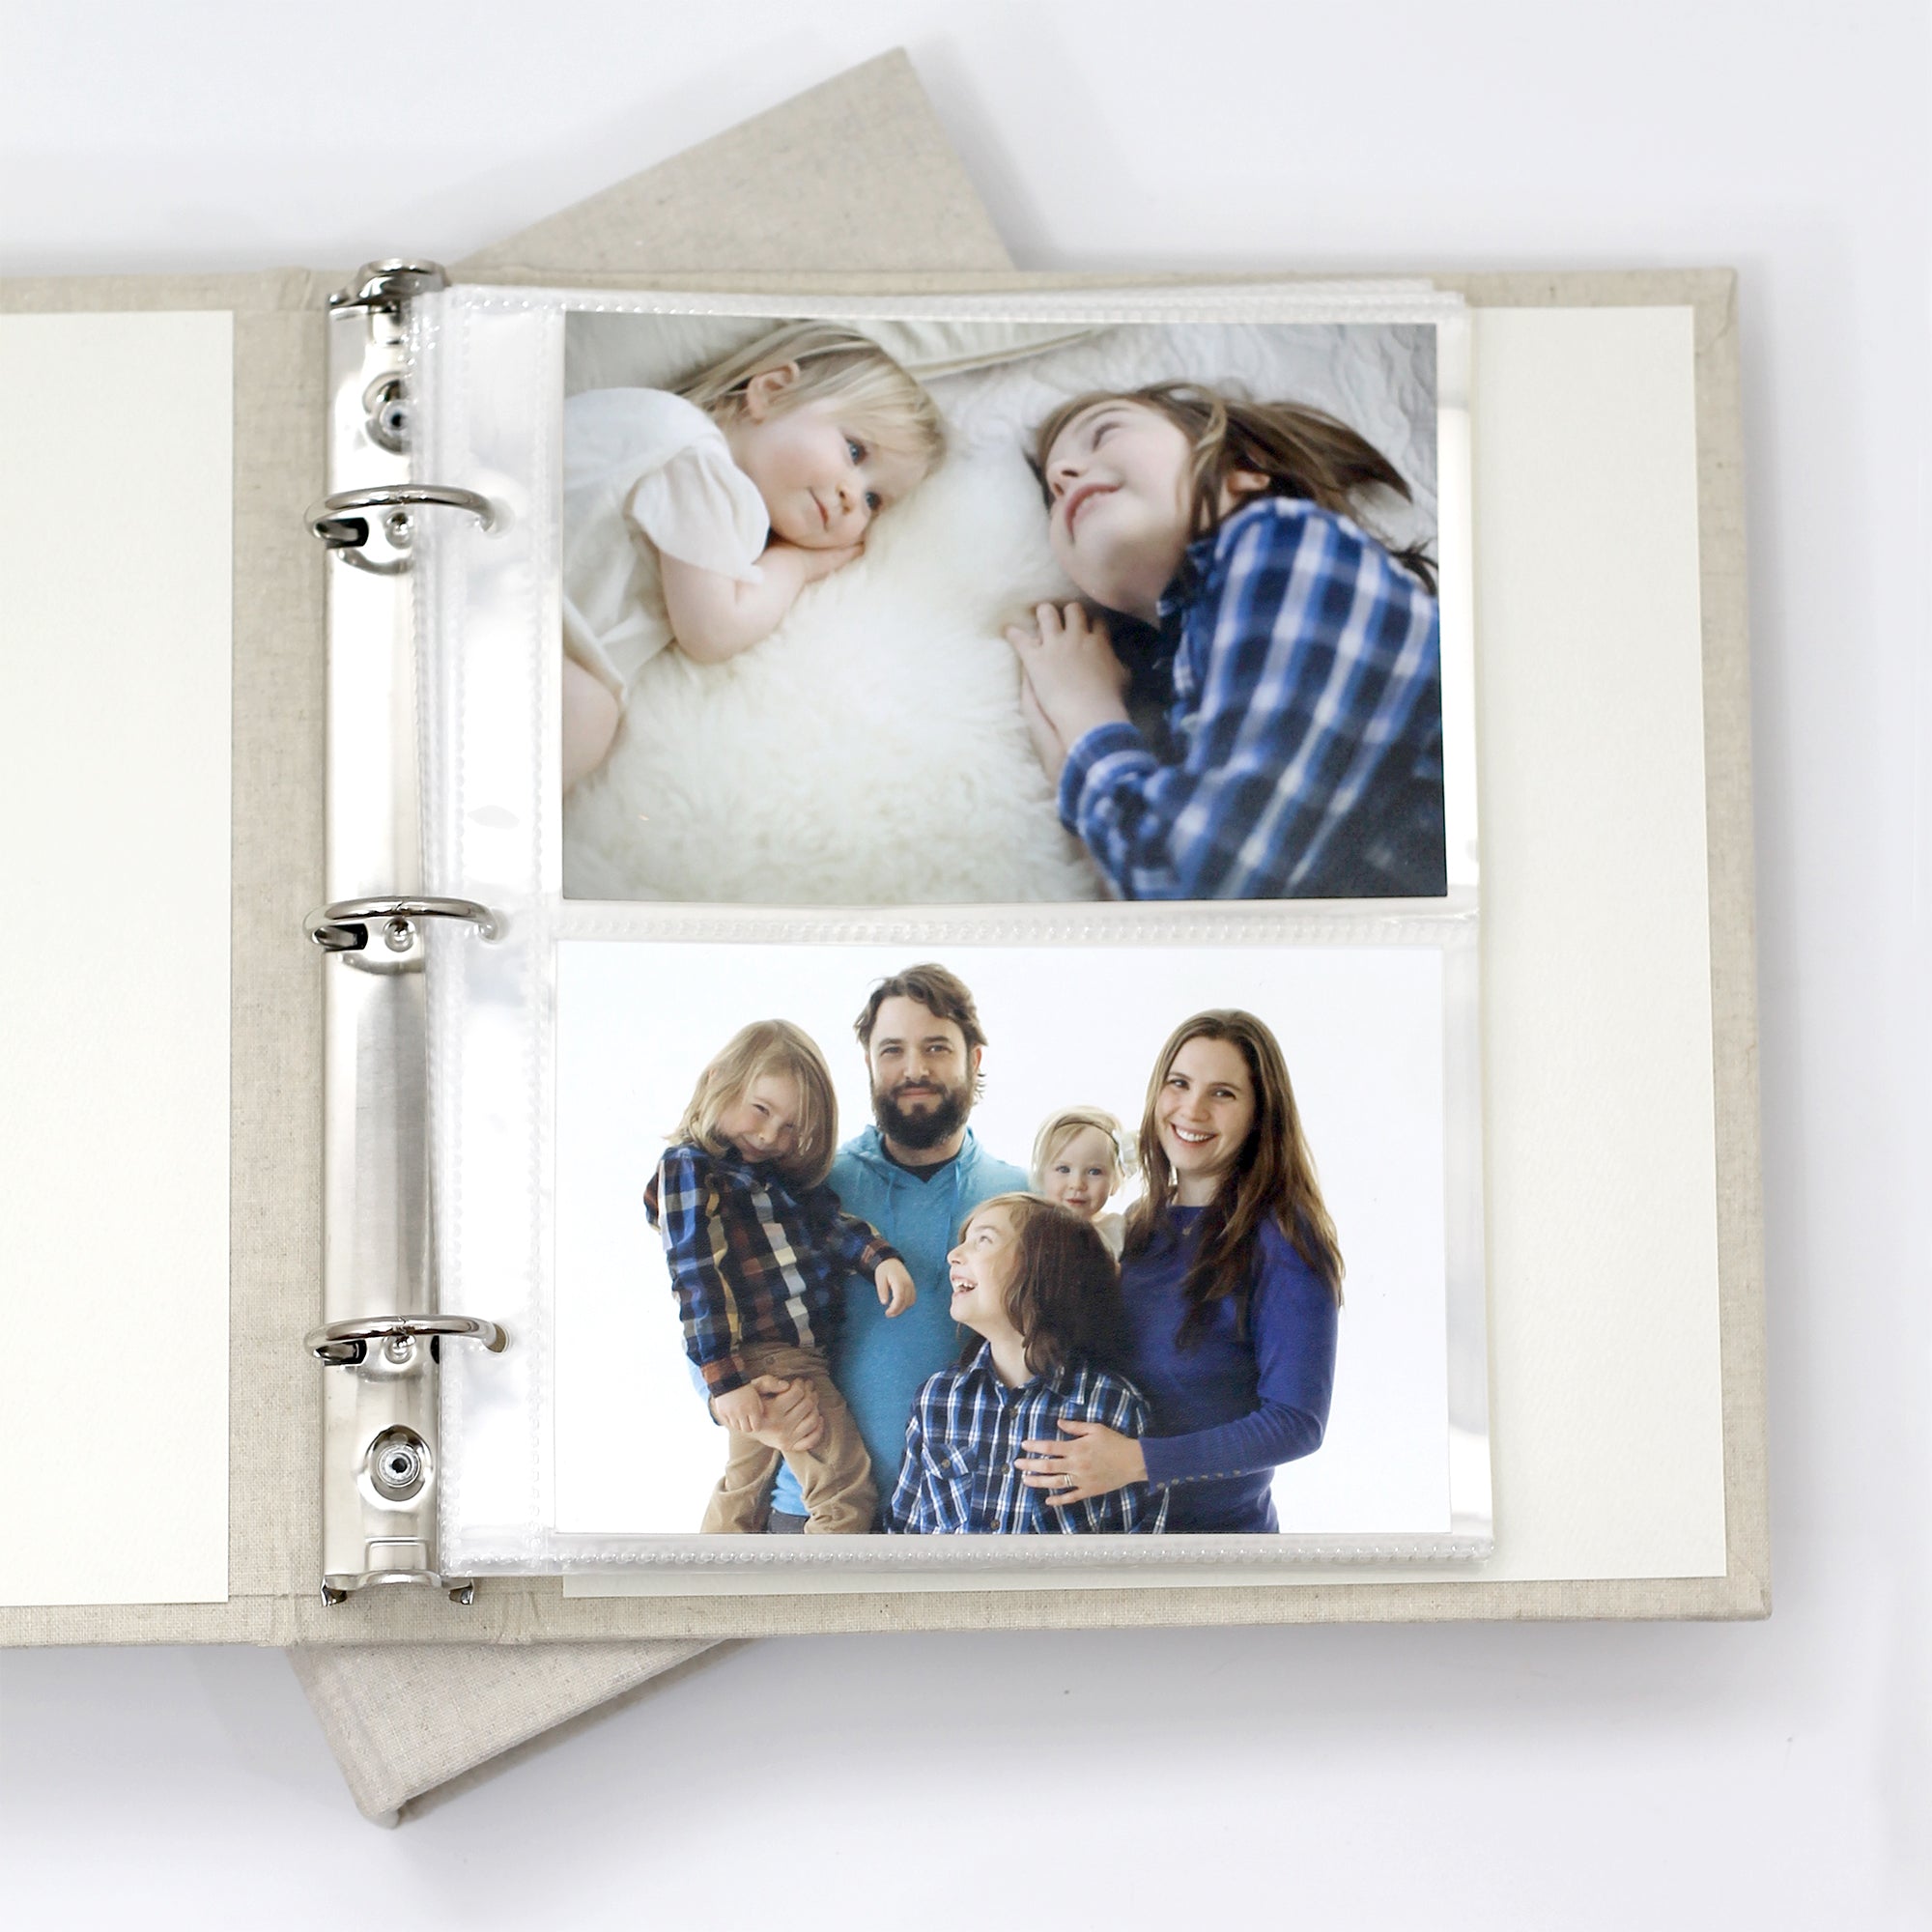 Large Photo Binder (for 4x6 photos) with Coral Cotton Cover - Rag & Bone  Bindery